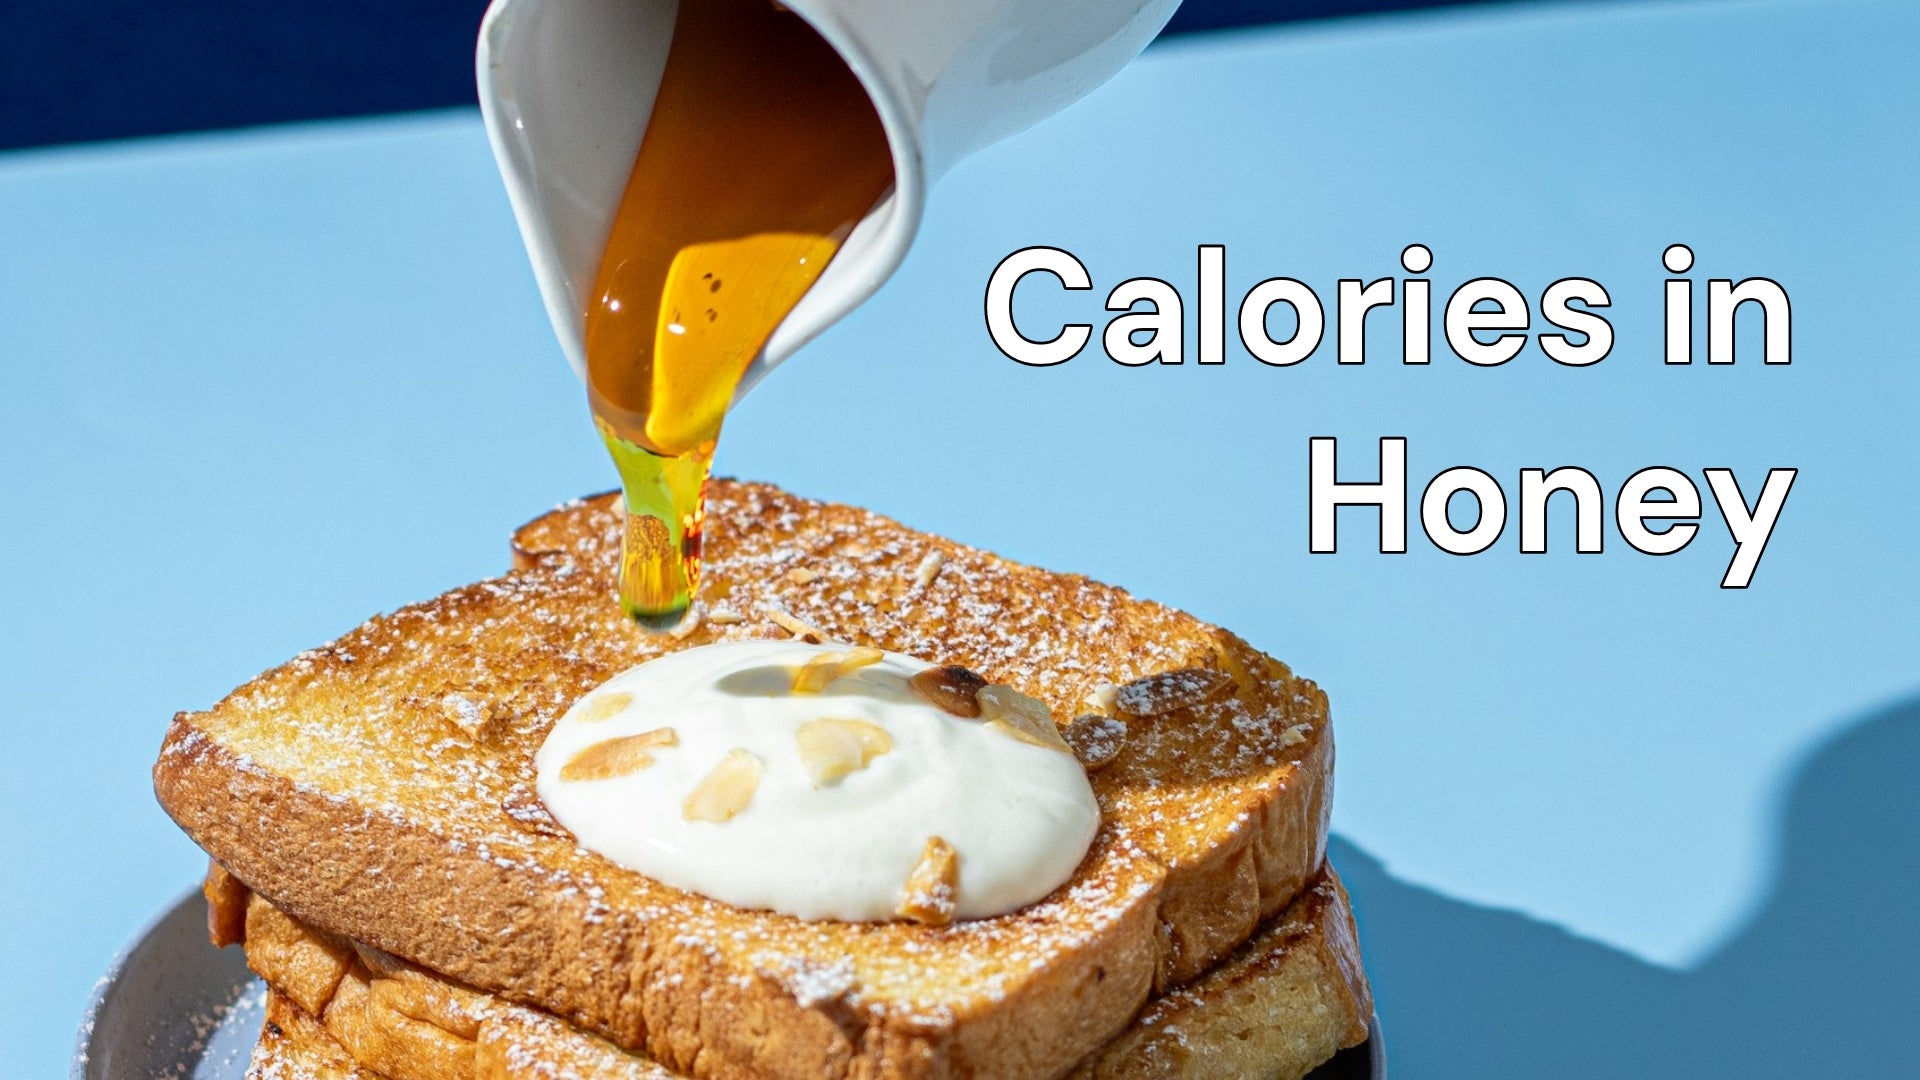 How Many Calories Are in Honey?